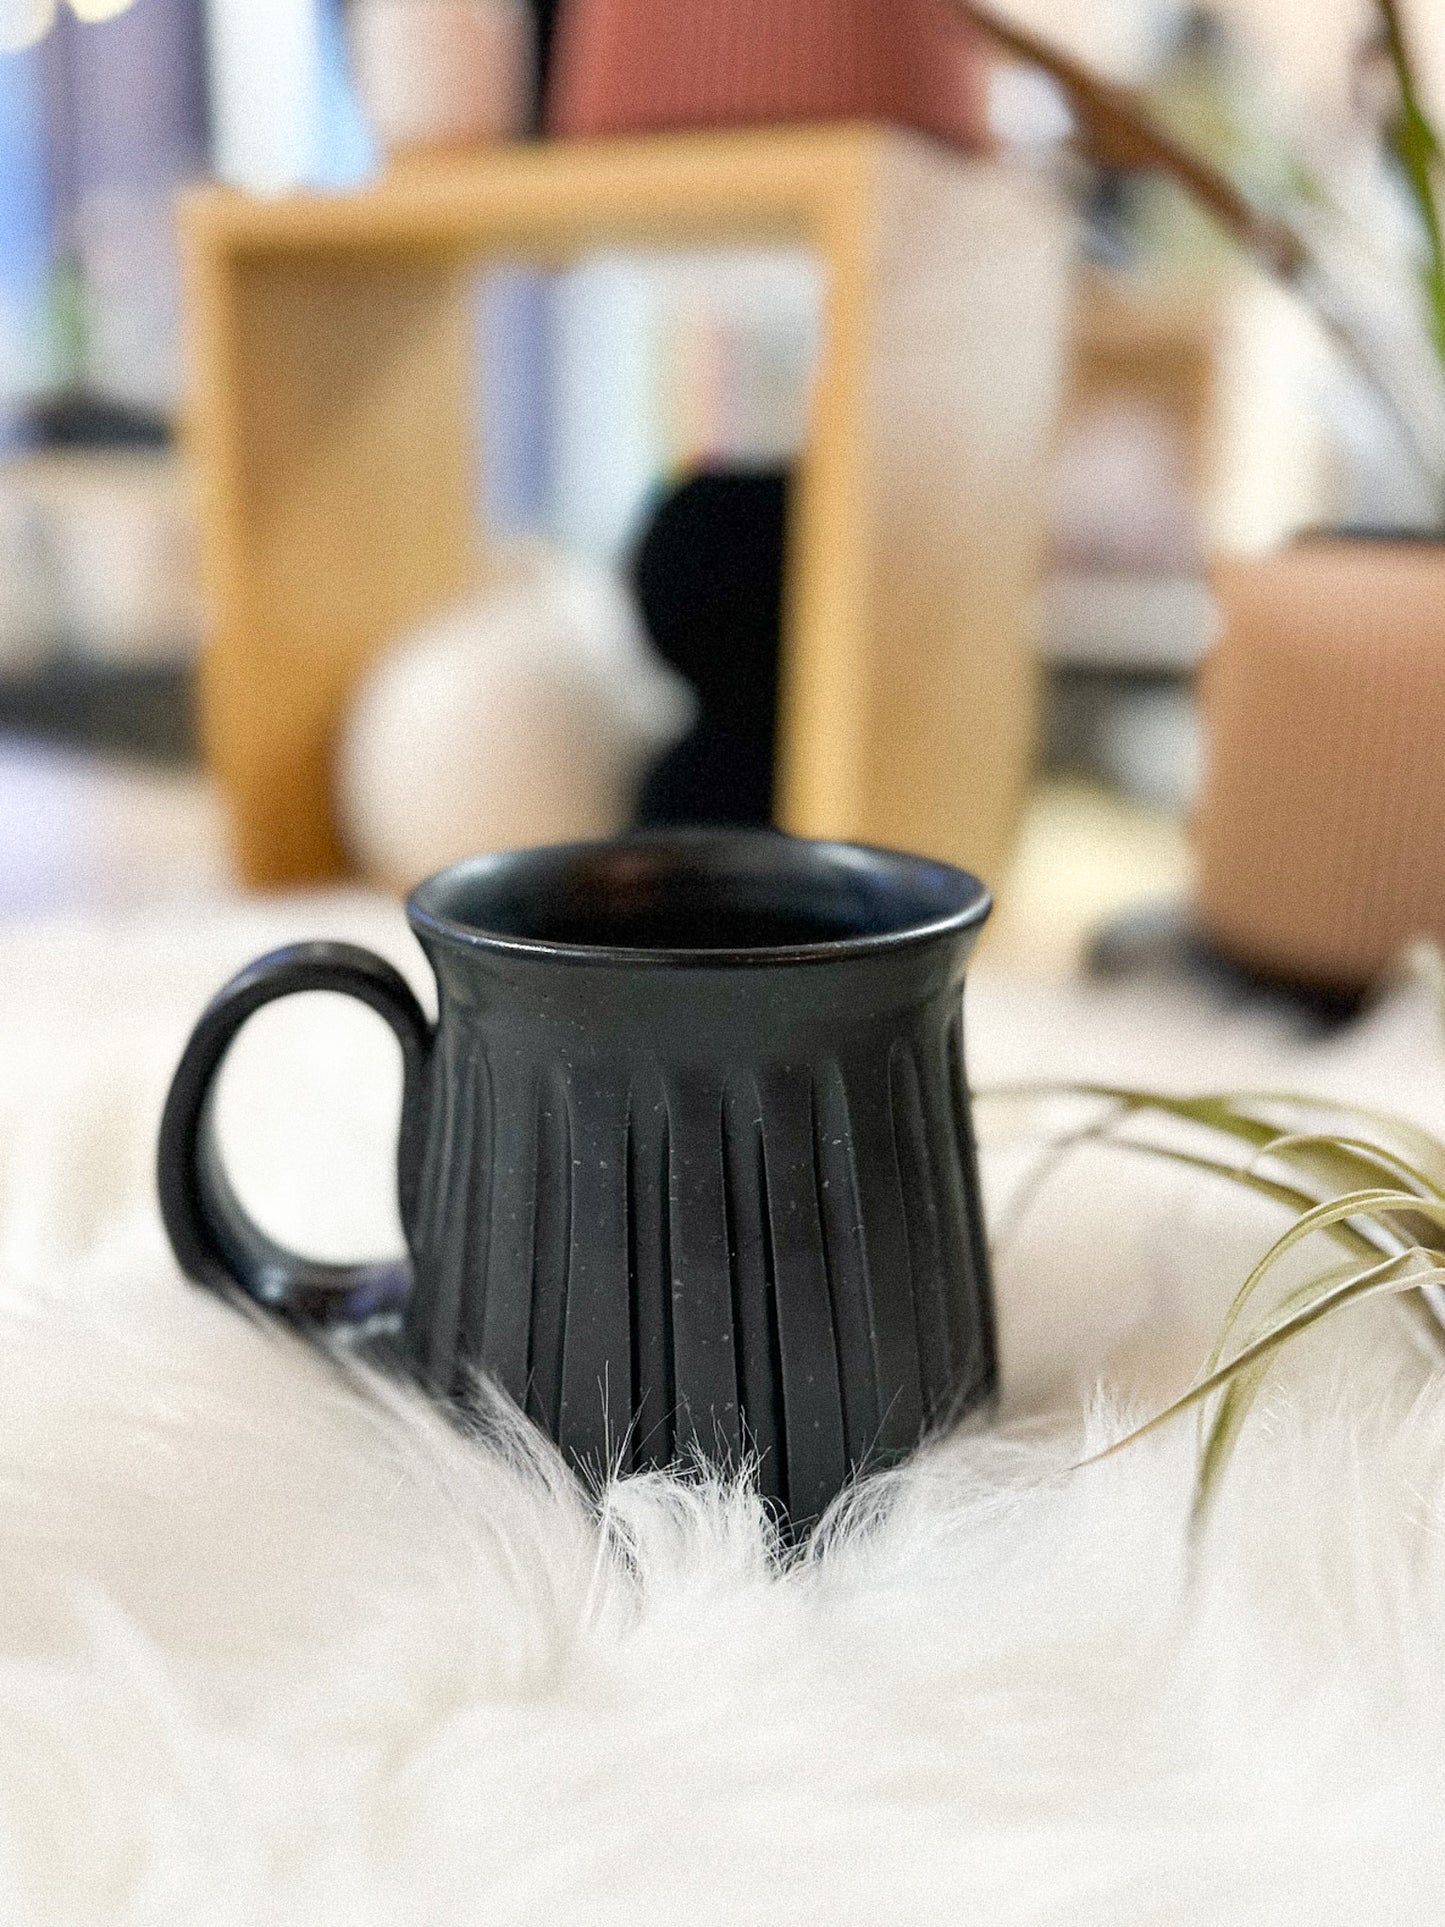 Black Carved Vertical Stripes Mug by Night School Knits and Pots #31